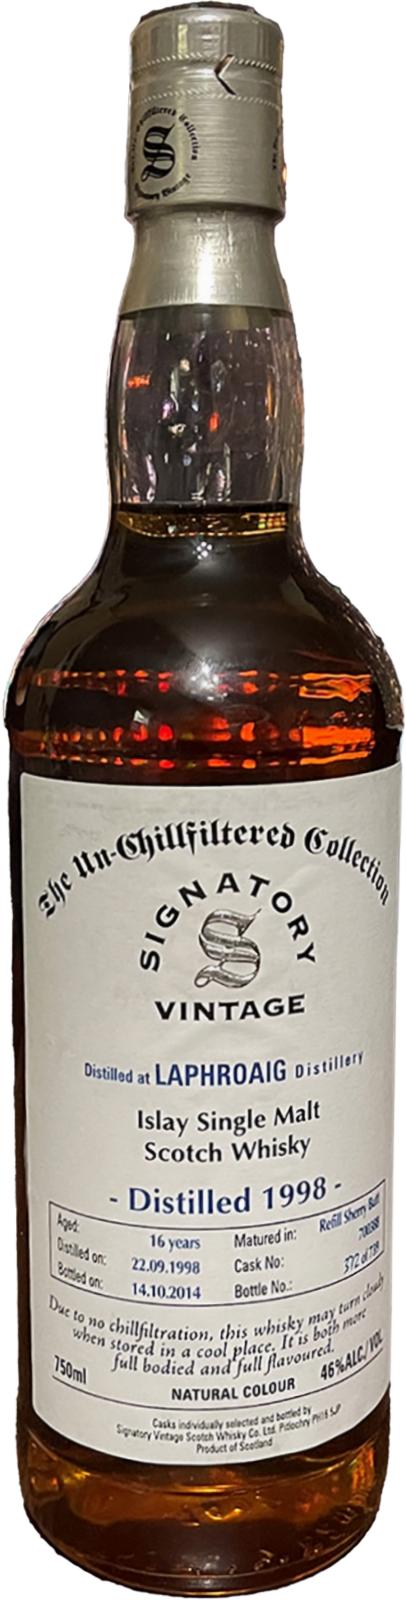 Laphroaig 1998 SV The Un-Chillfiltered Collection Refill Sherry Butt 700388 46% 750ml